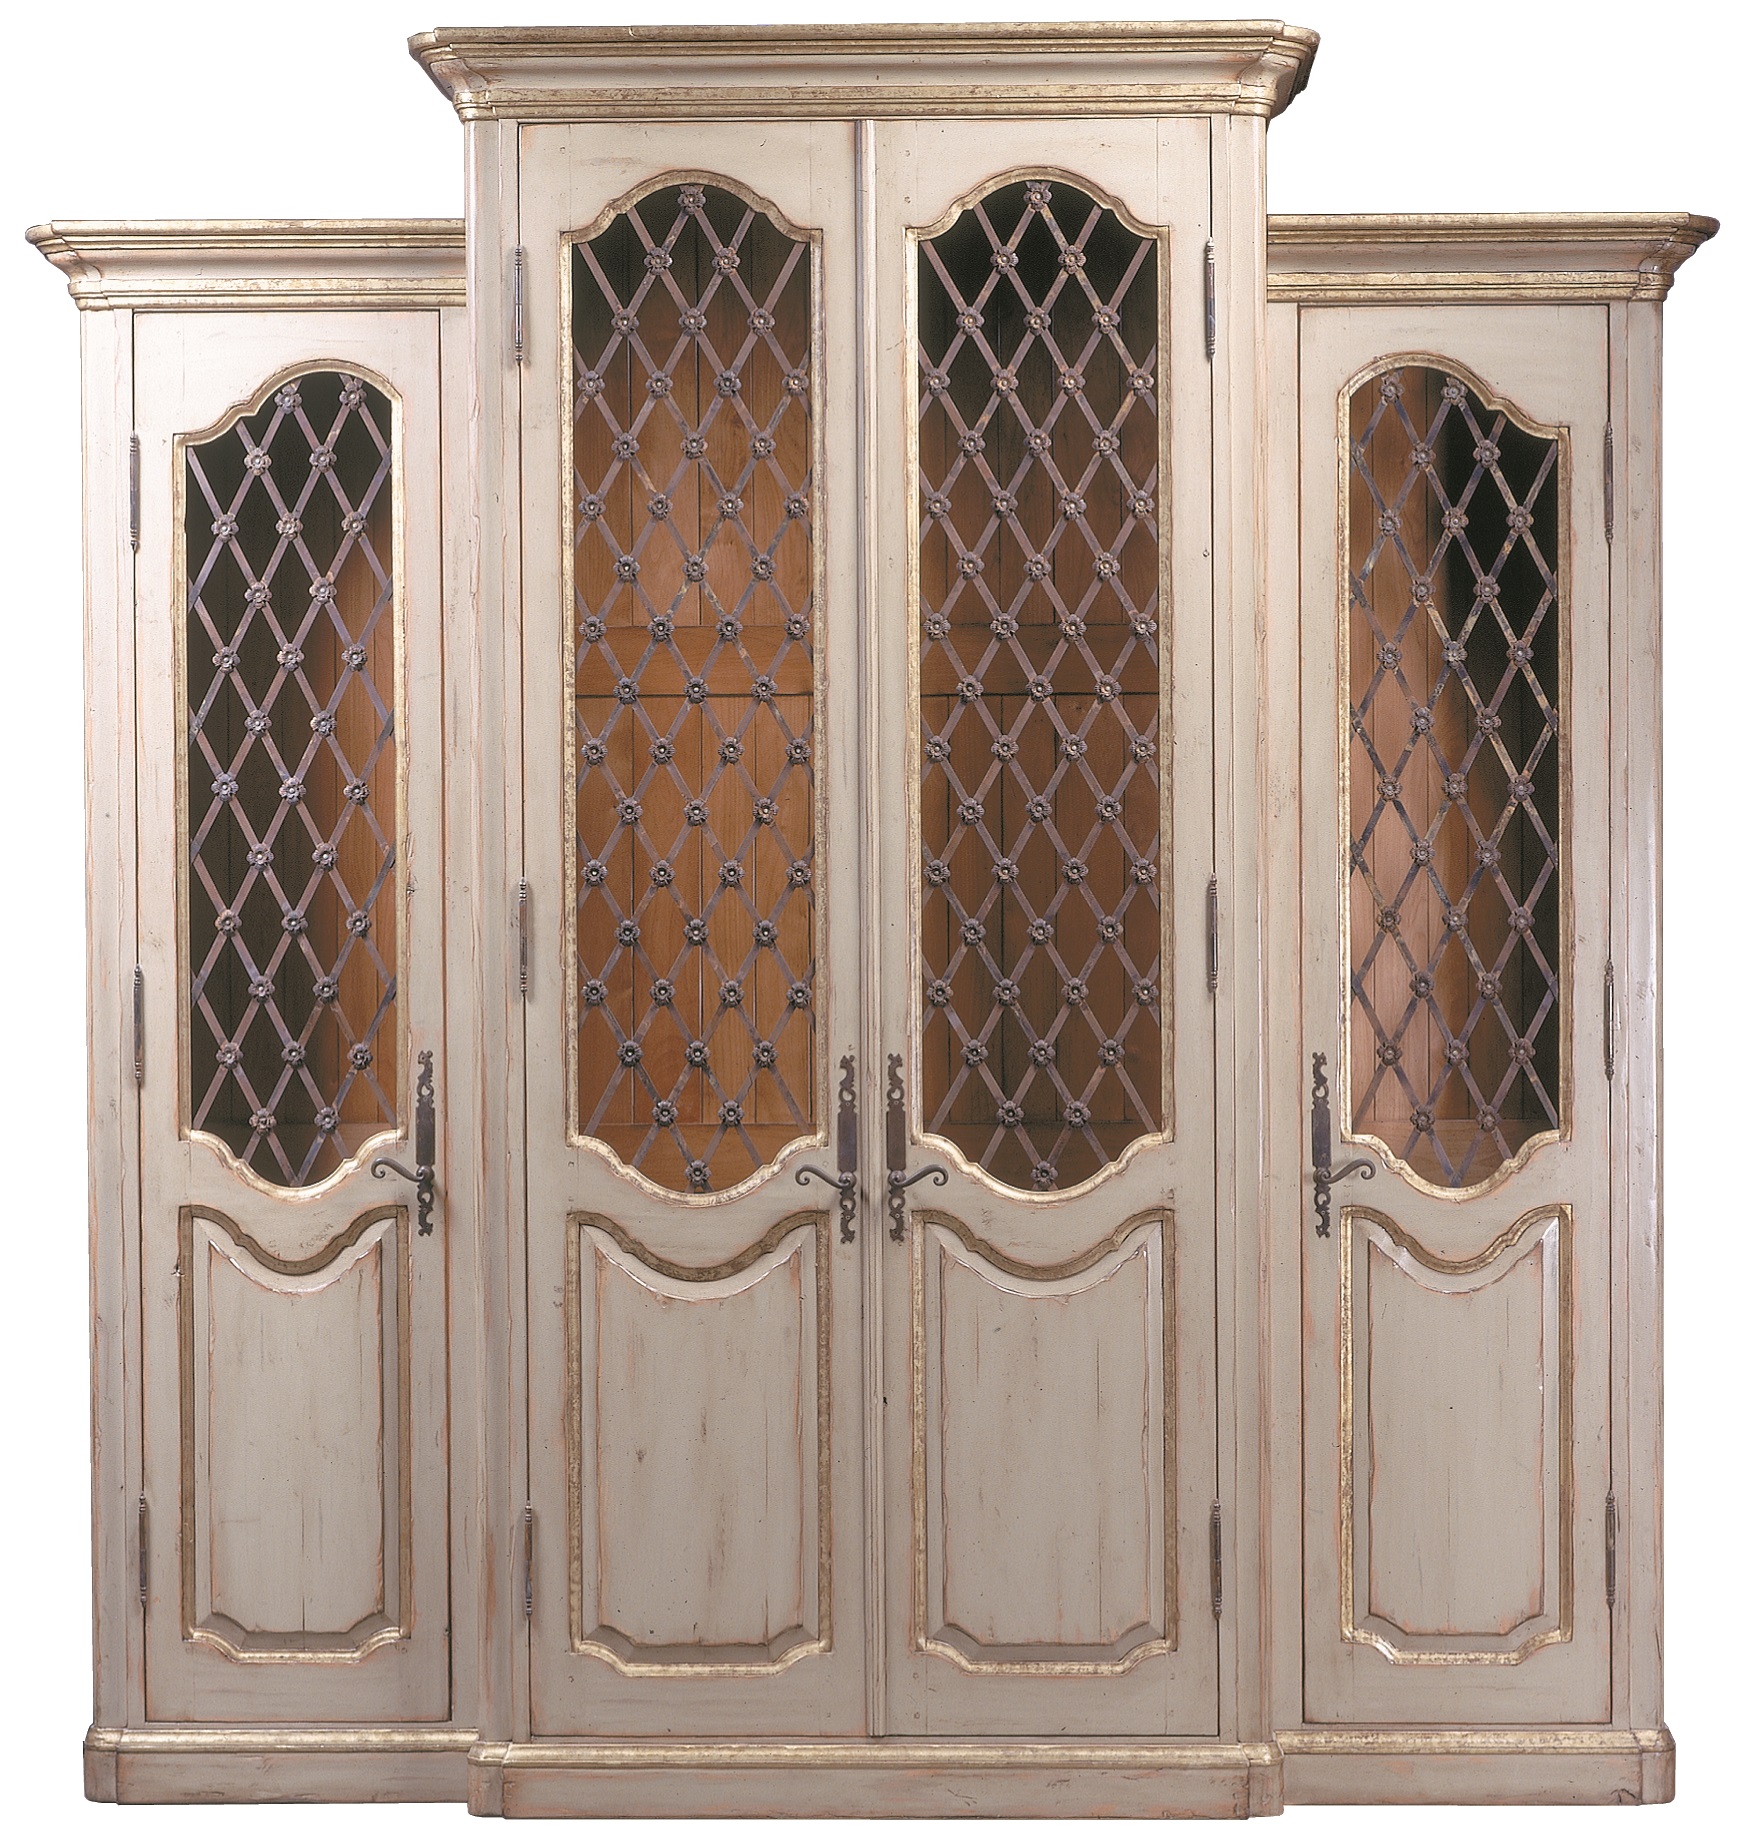 Verona traditional wall unit cabinet by Woodland furniture in Idaho Falls